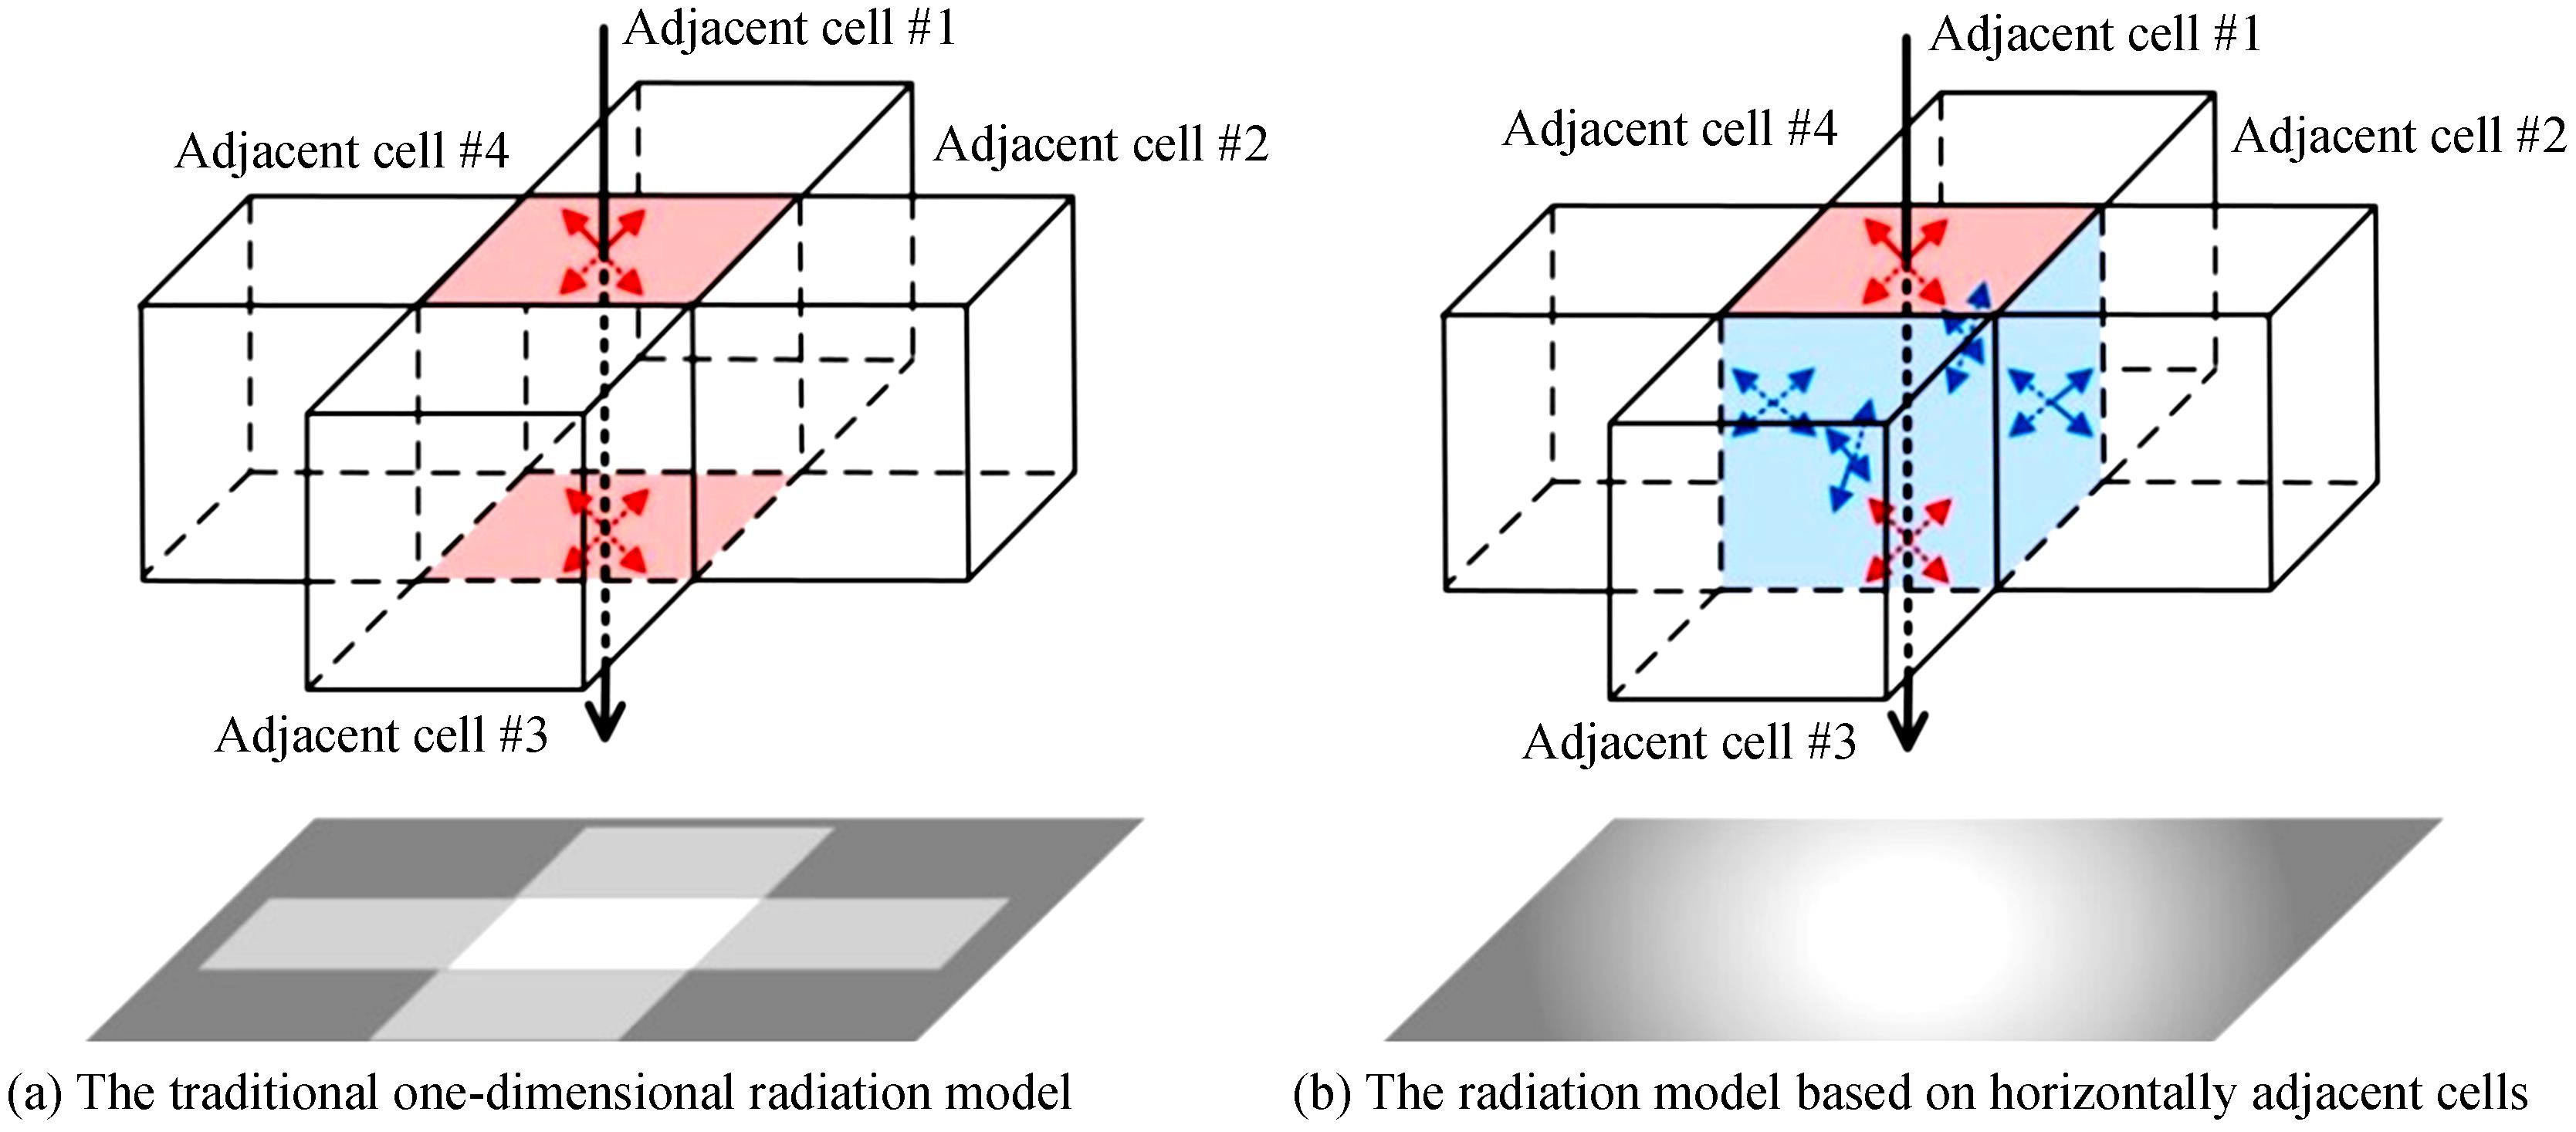 Contrastive diagrams of the traditional one-dimensional radiation model and the radiation model based on horizontally adjacent cells